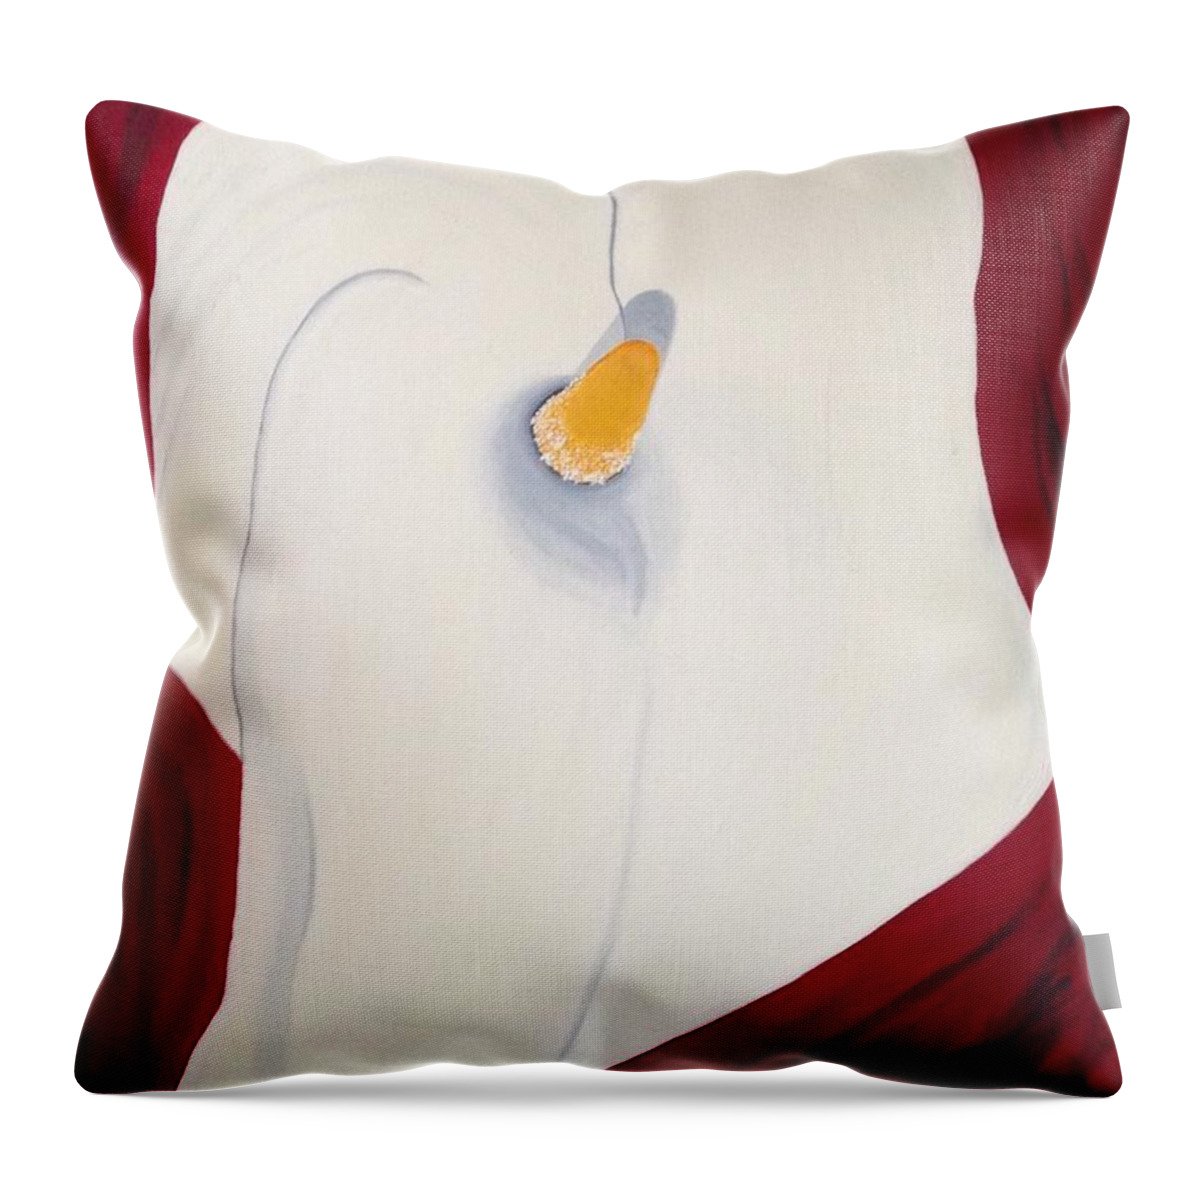 Calla Lily Throw Pillow featuring the painting Calla Lily by Denise Railey